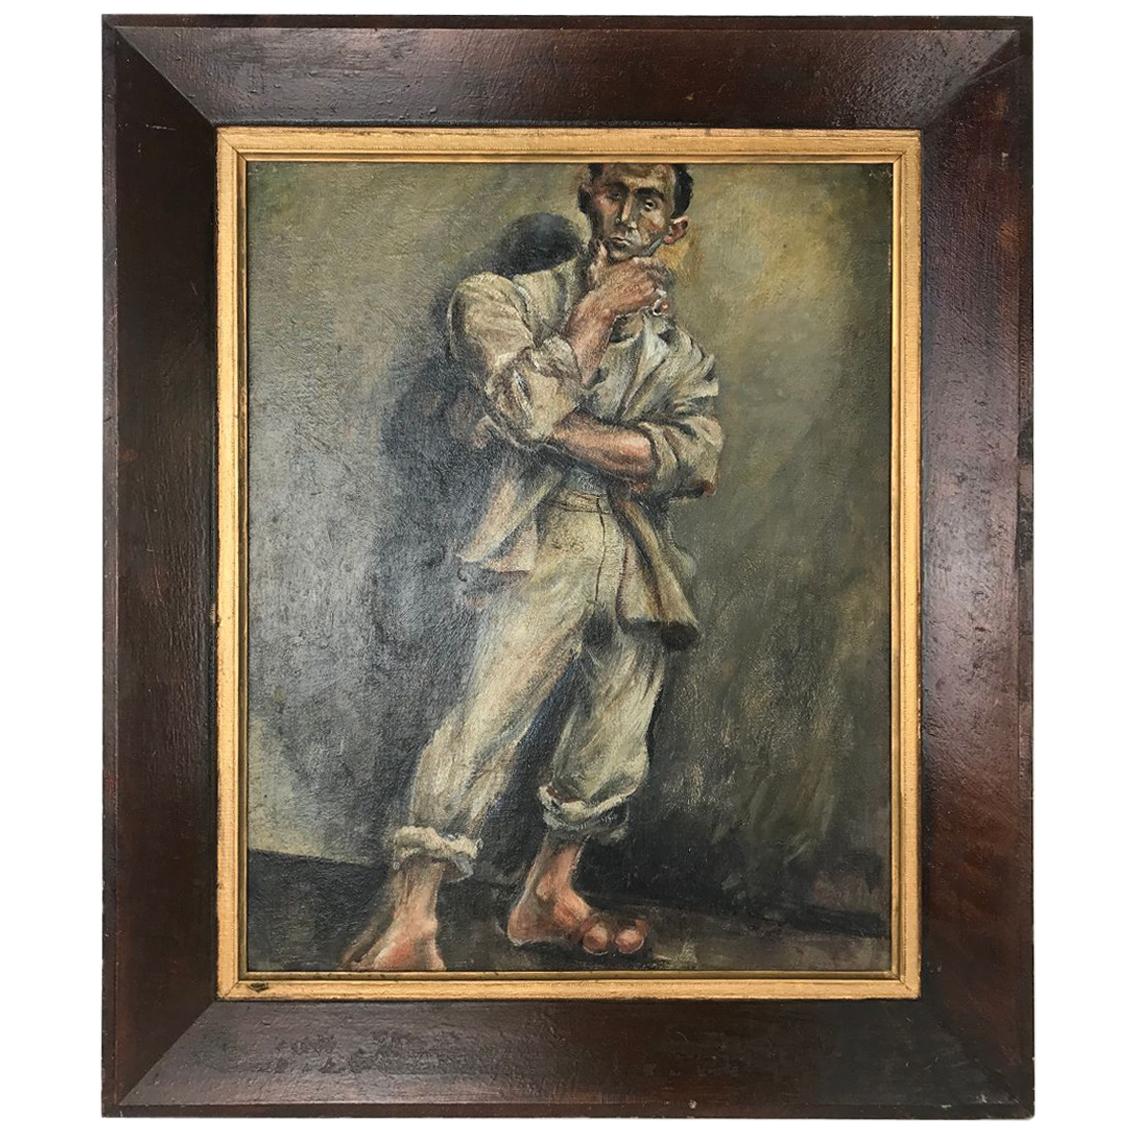 Marion Greenwood Painting Man in Suit and Sandals 1932 Oil on Board